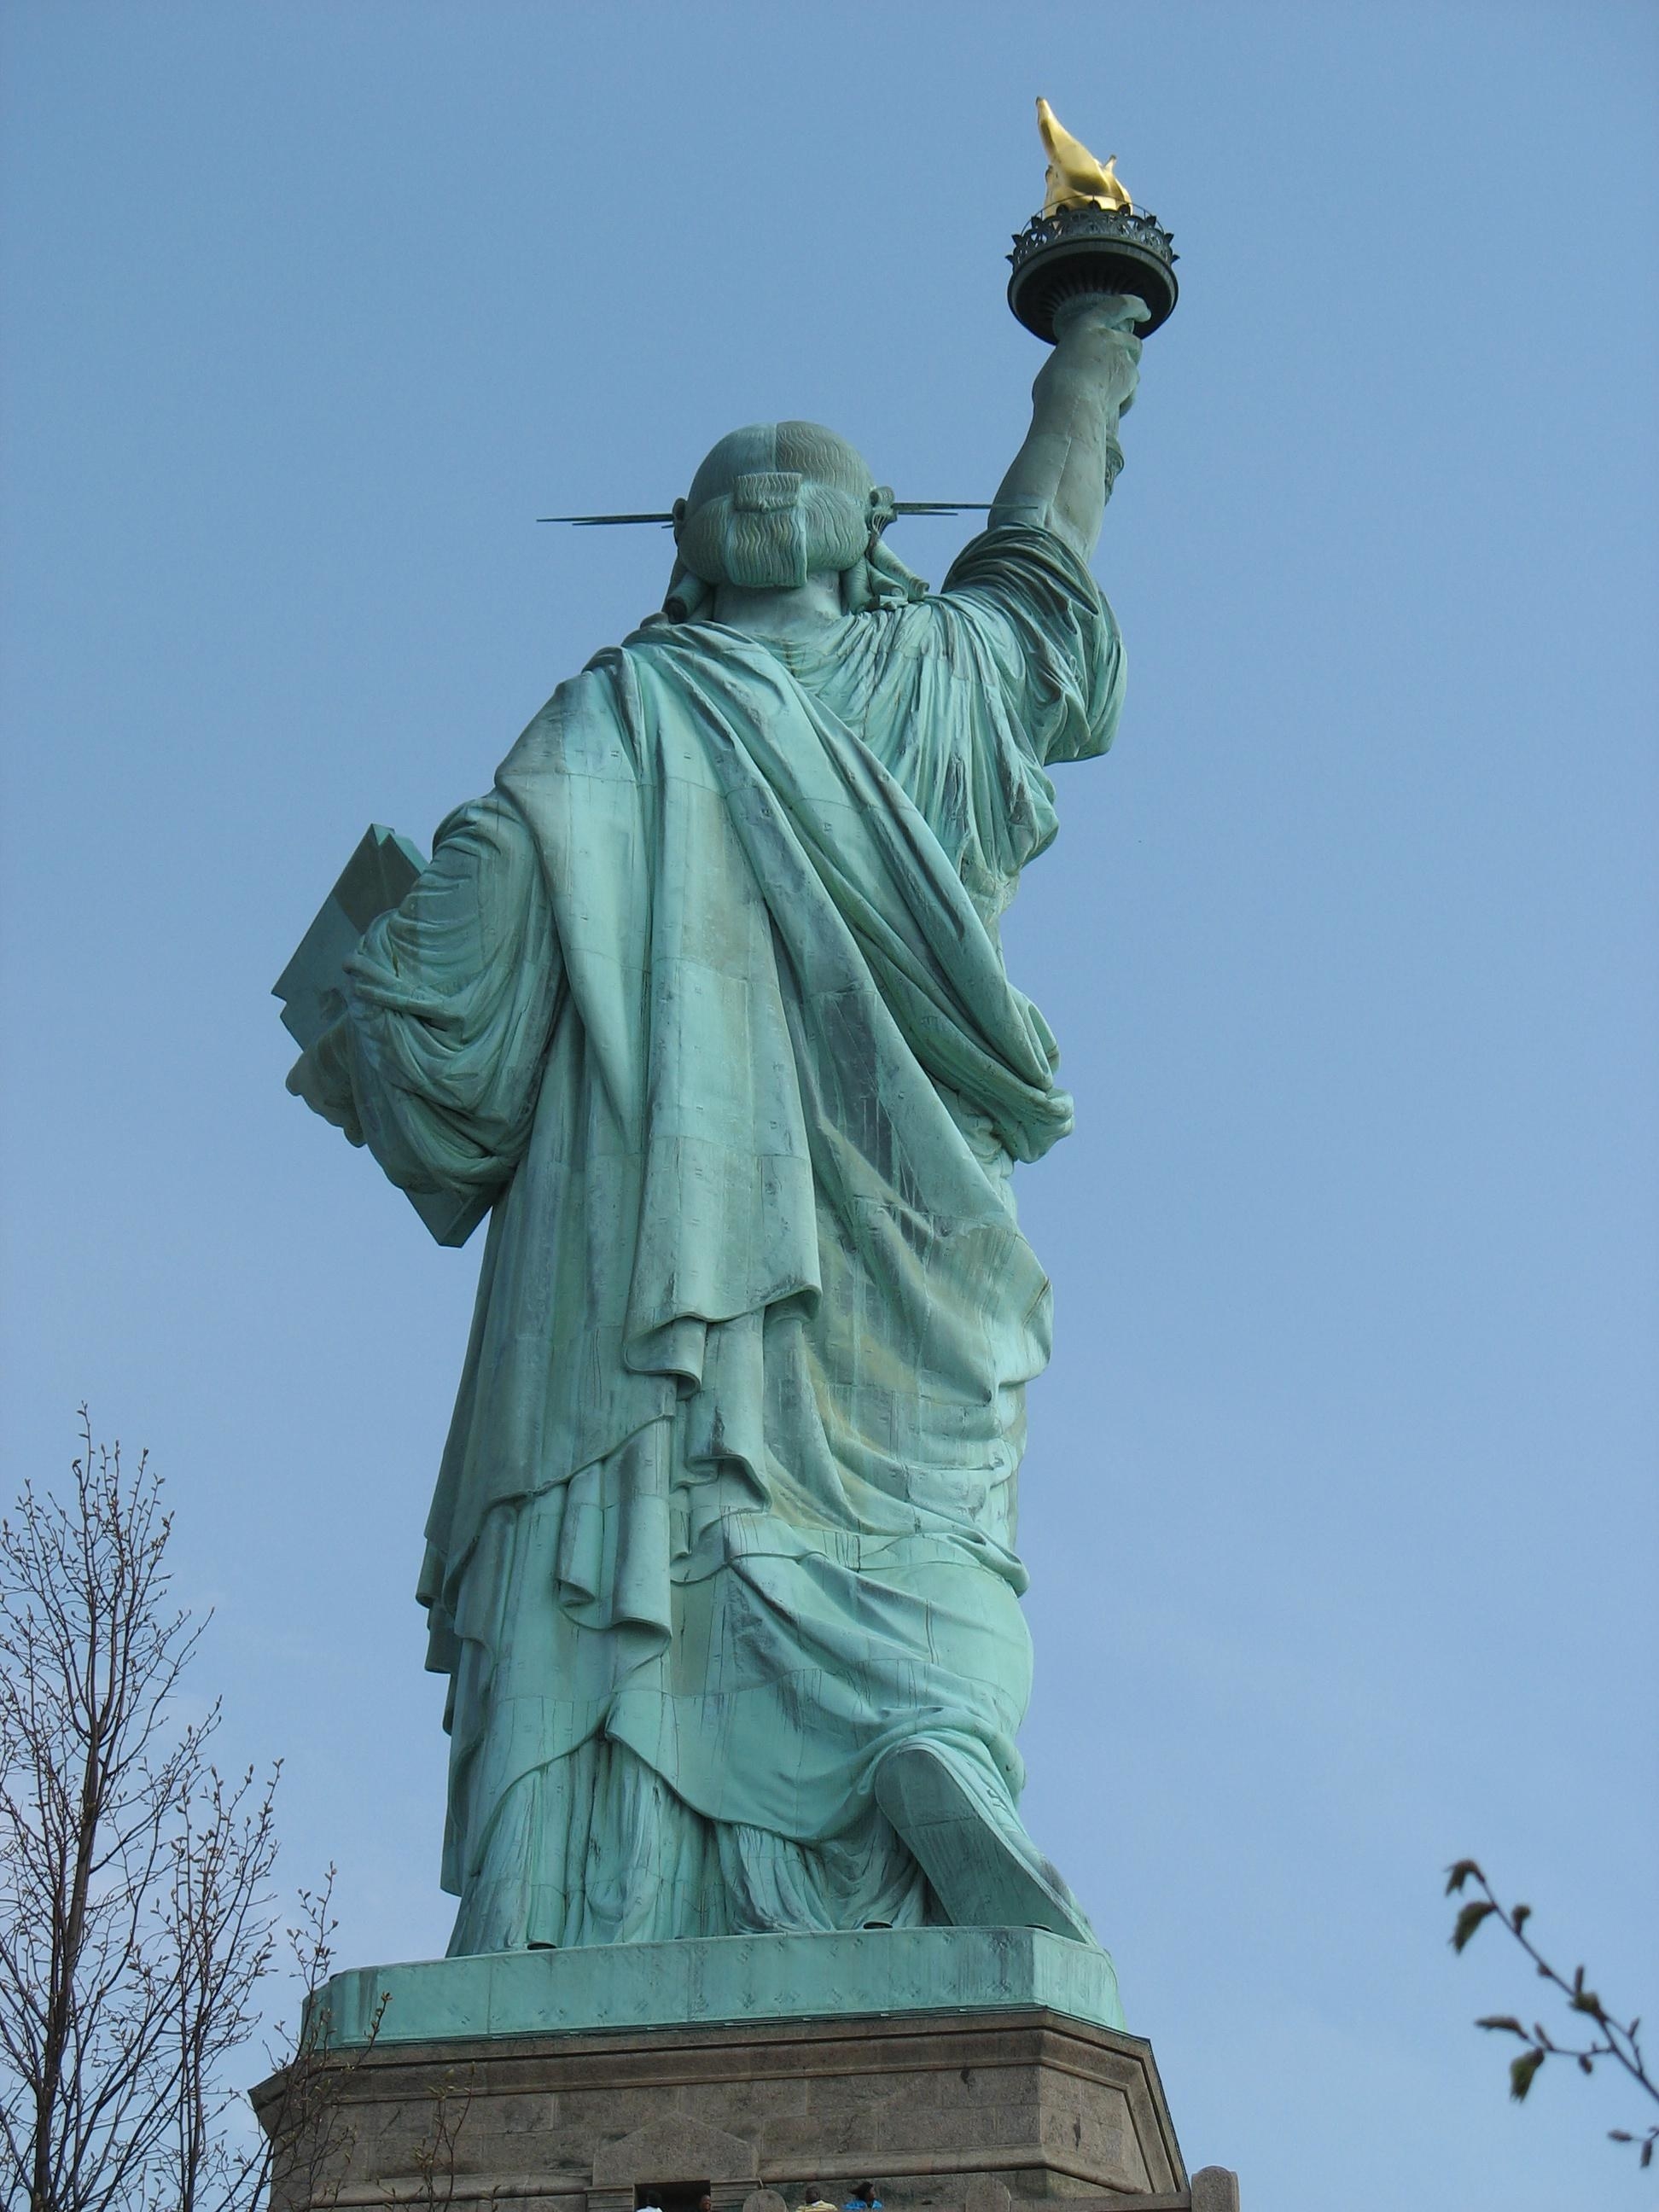 The back of the Statue of Liberty